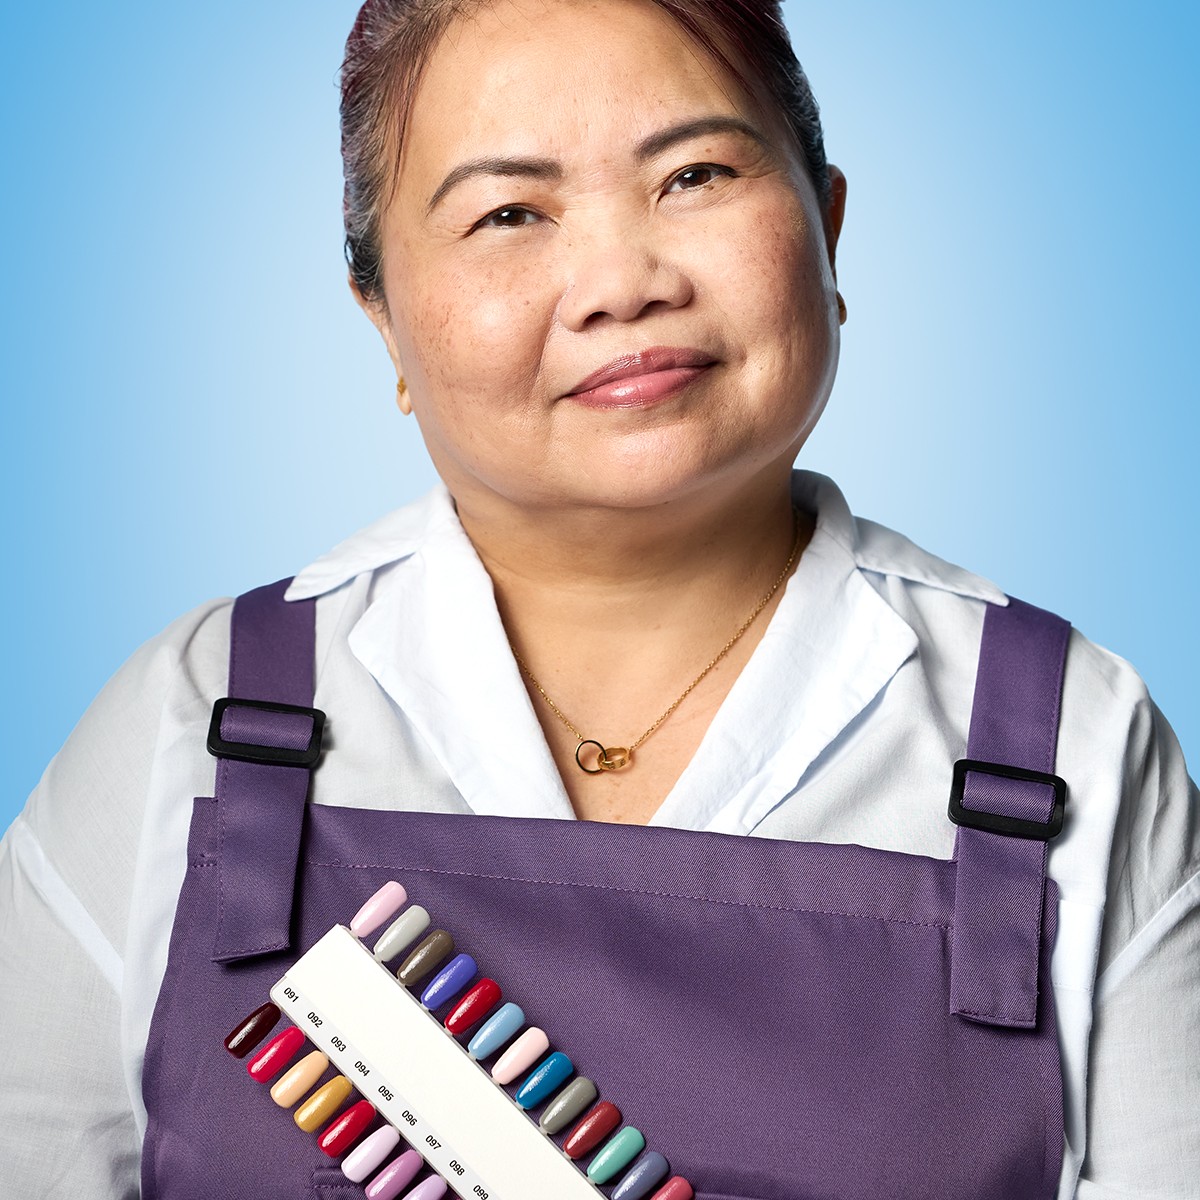 Nail salon owner wearing a purple apron and smiling into the camera